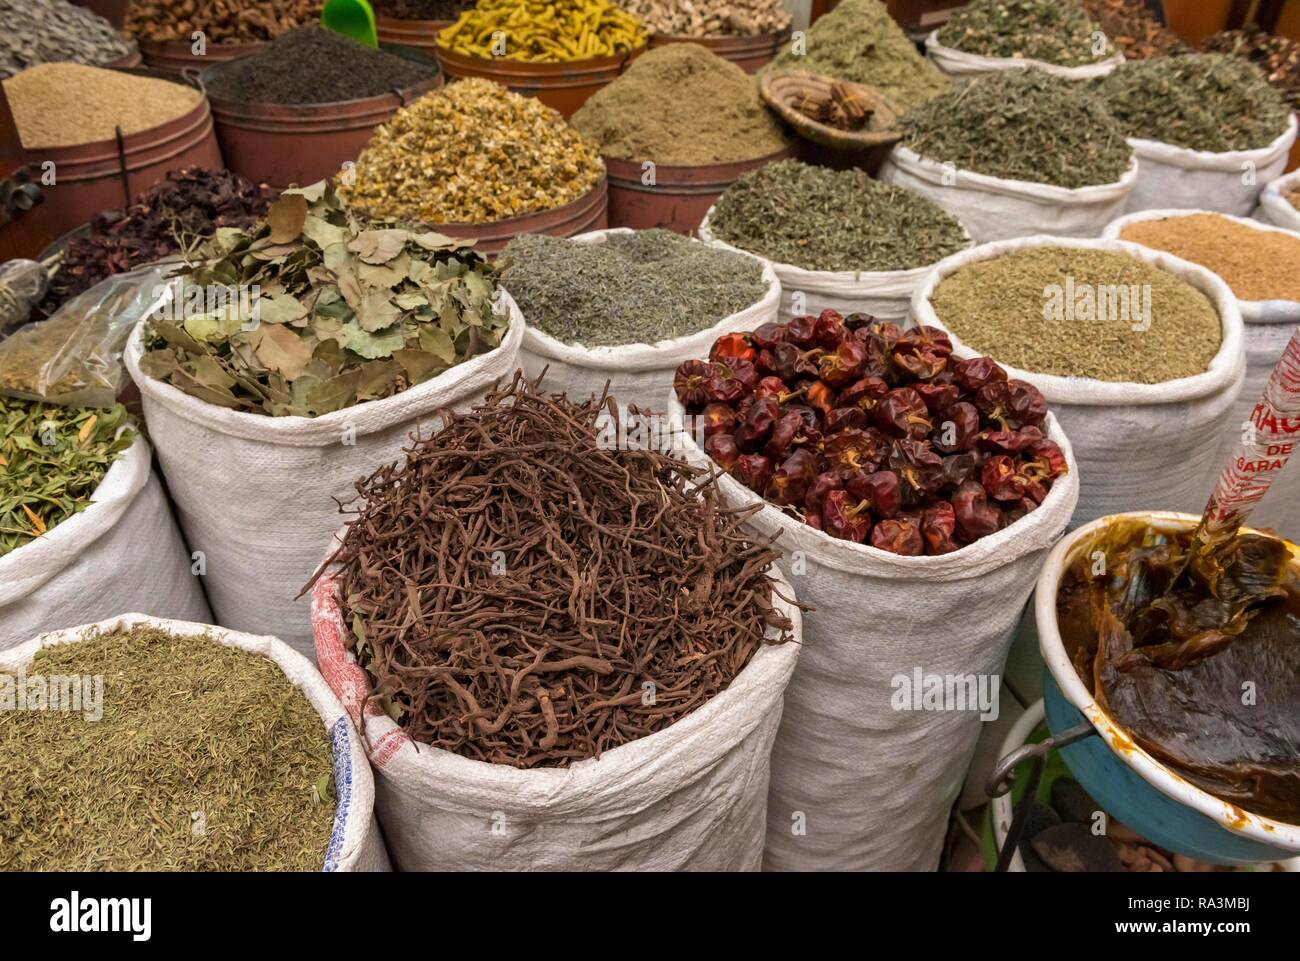 Sacks of dried spices and herbs in Marrakech spice market, Marrakech, Morocco Stock Photo